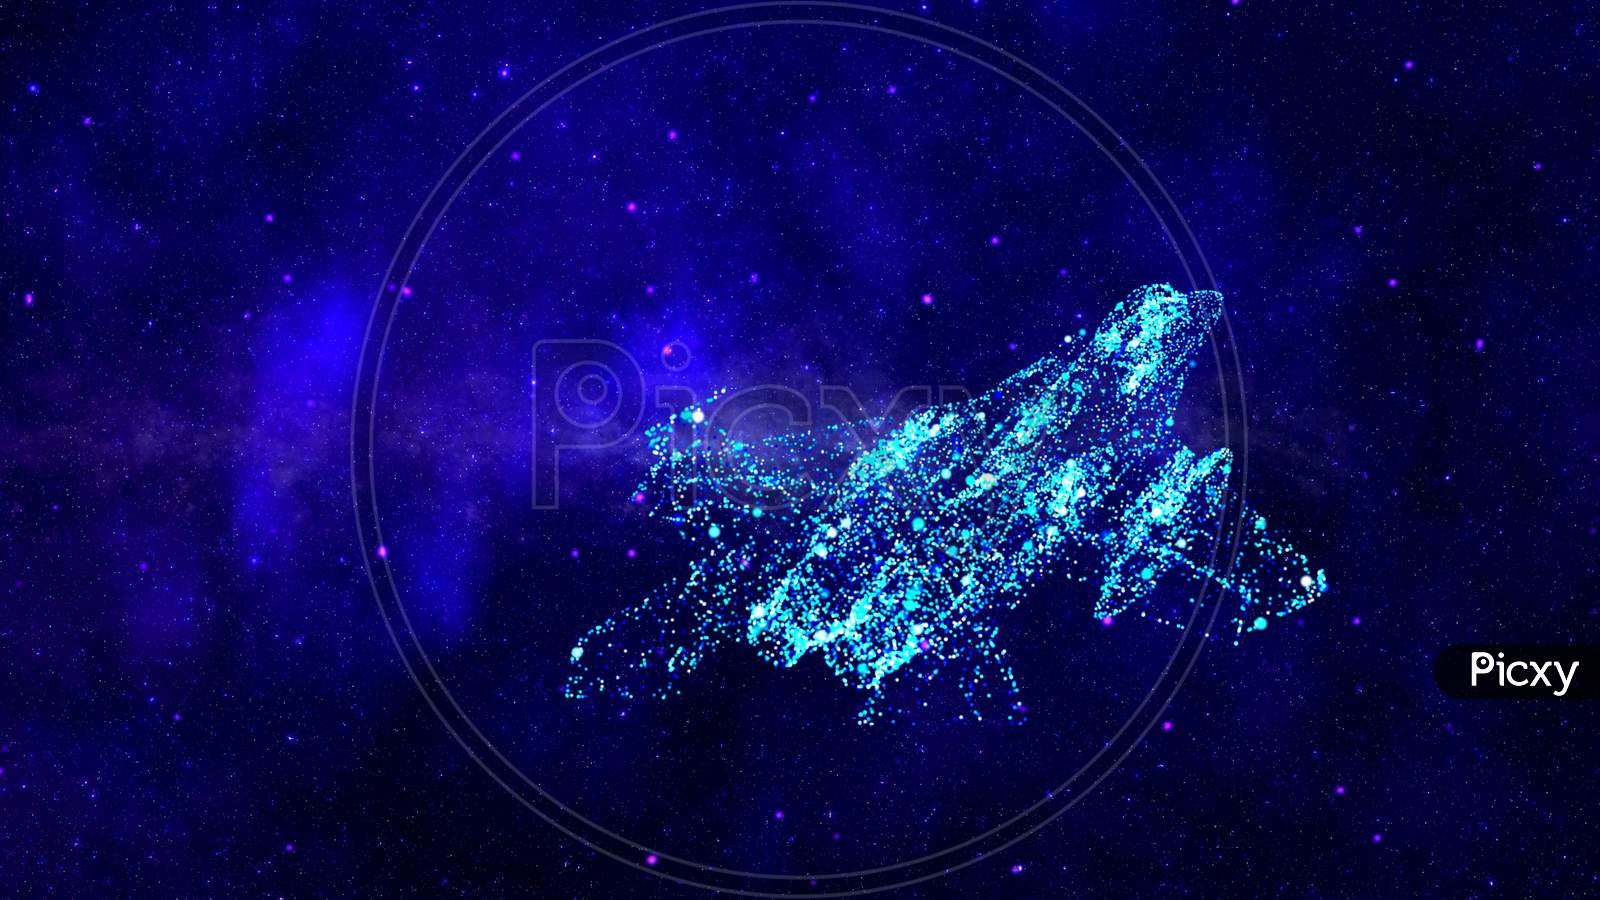 A Animated 3D Blue Print Model Of A Fighter Jet In Space